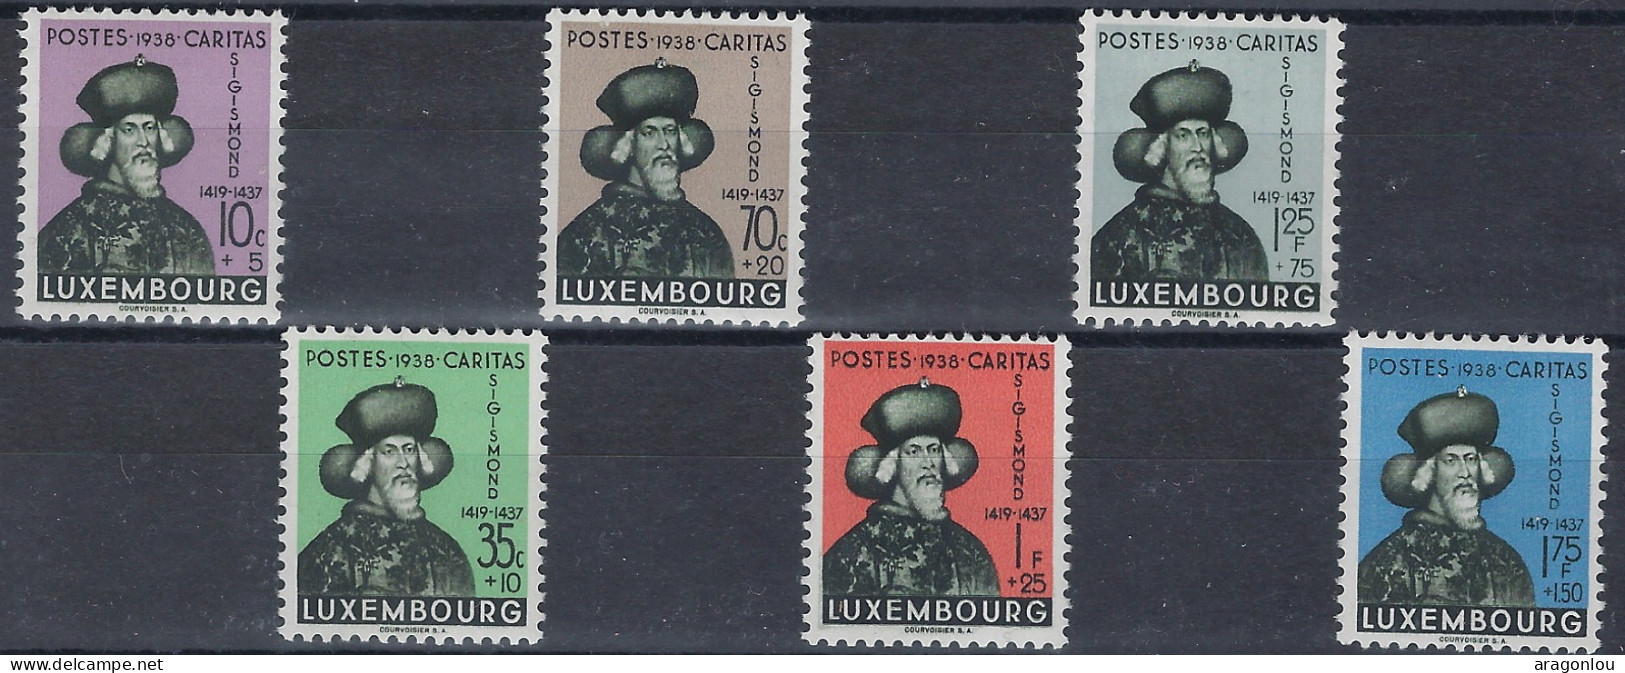 Luxembourg - Luxemburg - Timbres - Sigismund  1938  Série  * - Usados